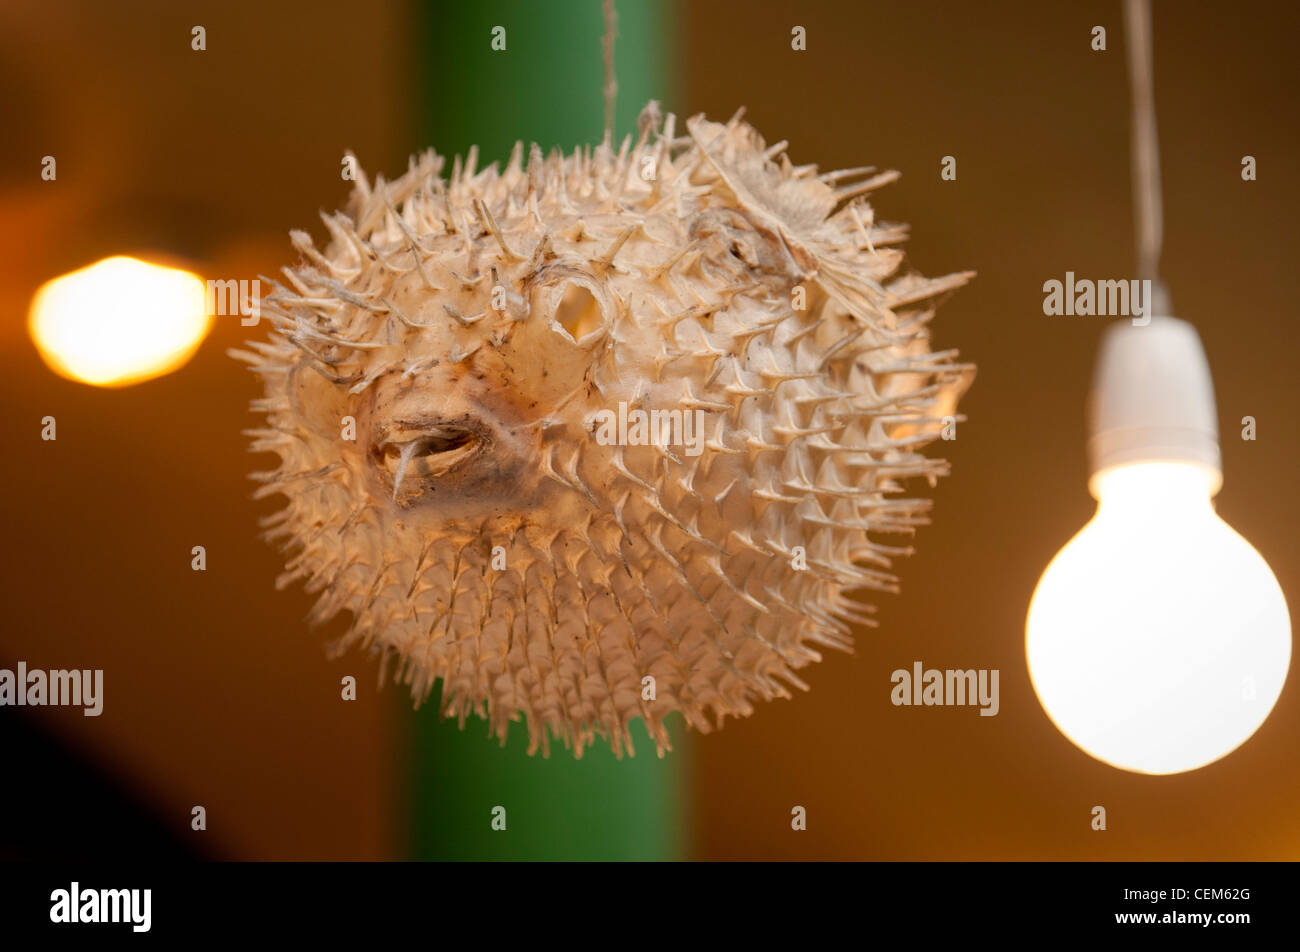 Dried Puffer Fish being used for decoration Stock Photo